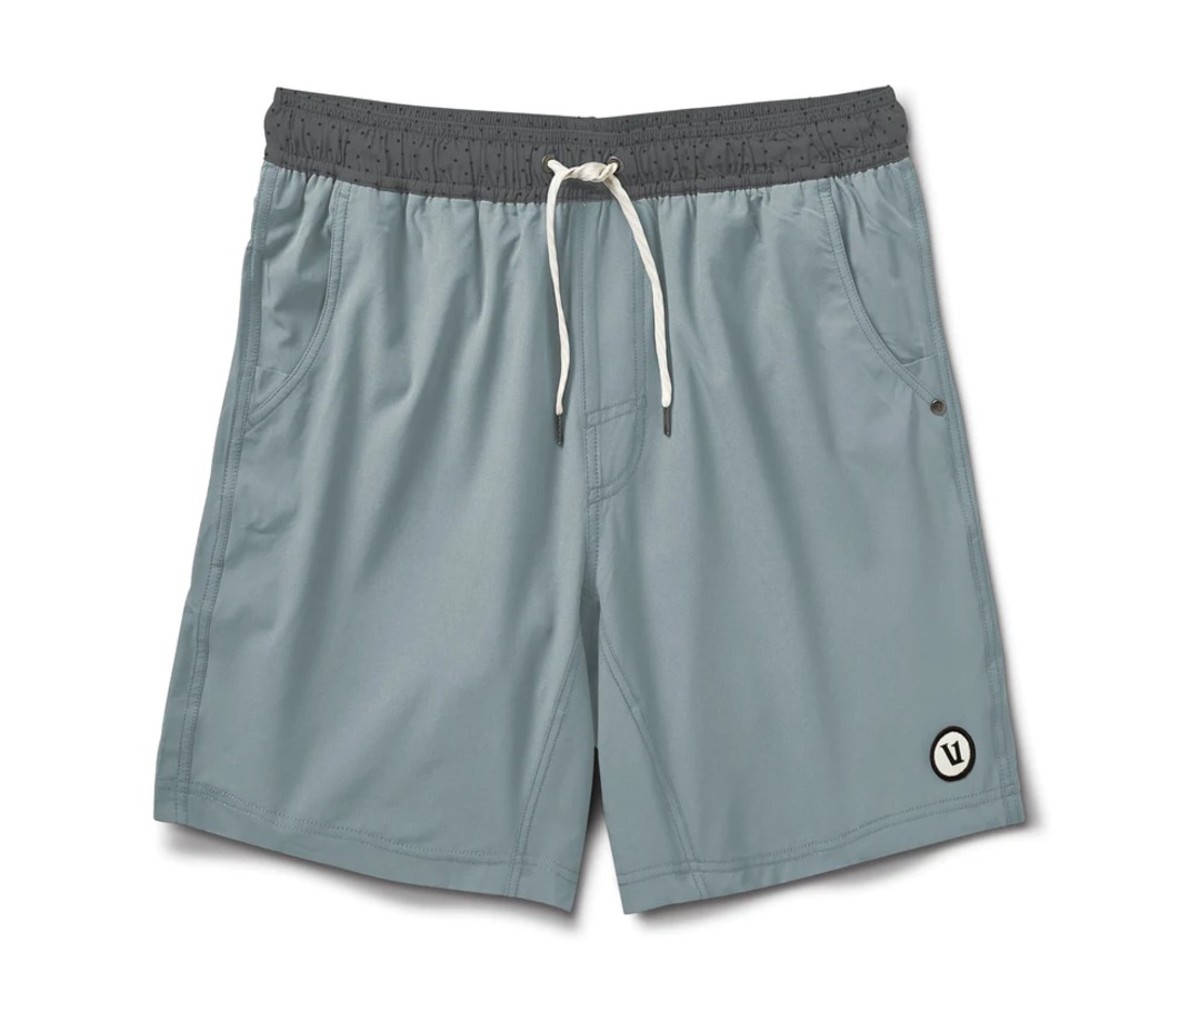 Best activewear: 7 of the best gym shorts for summer workouts